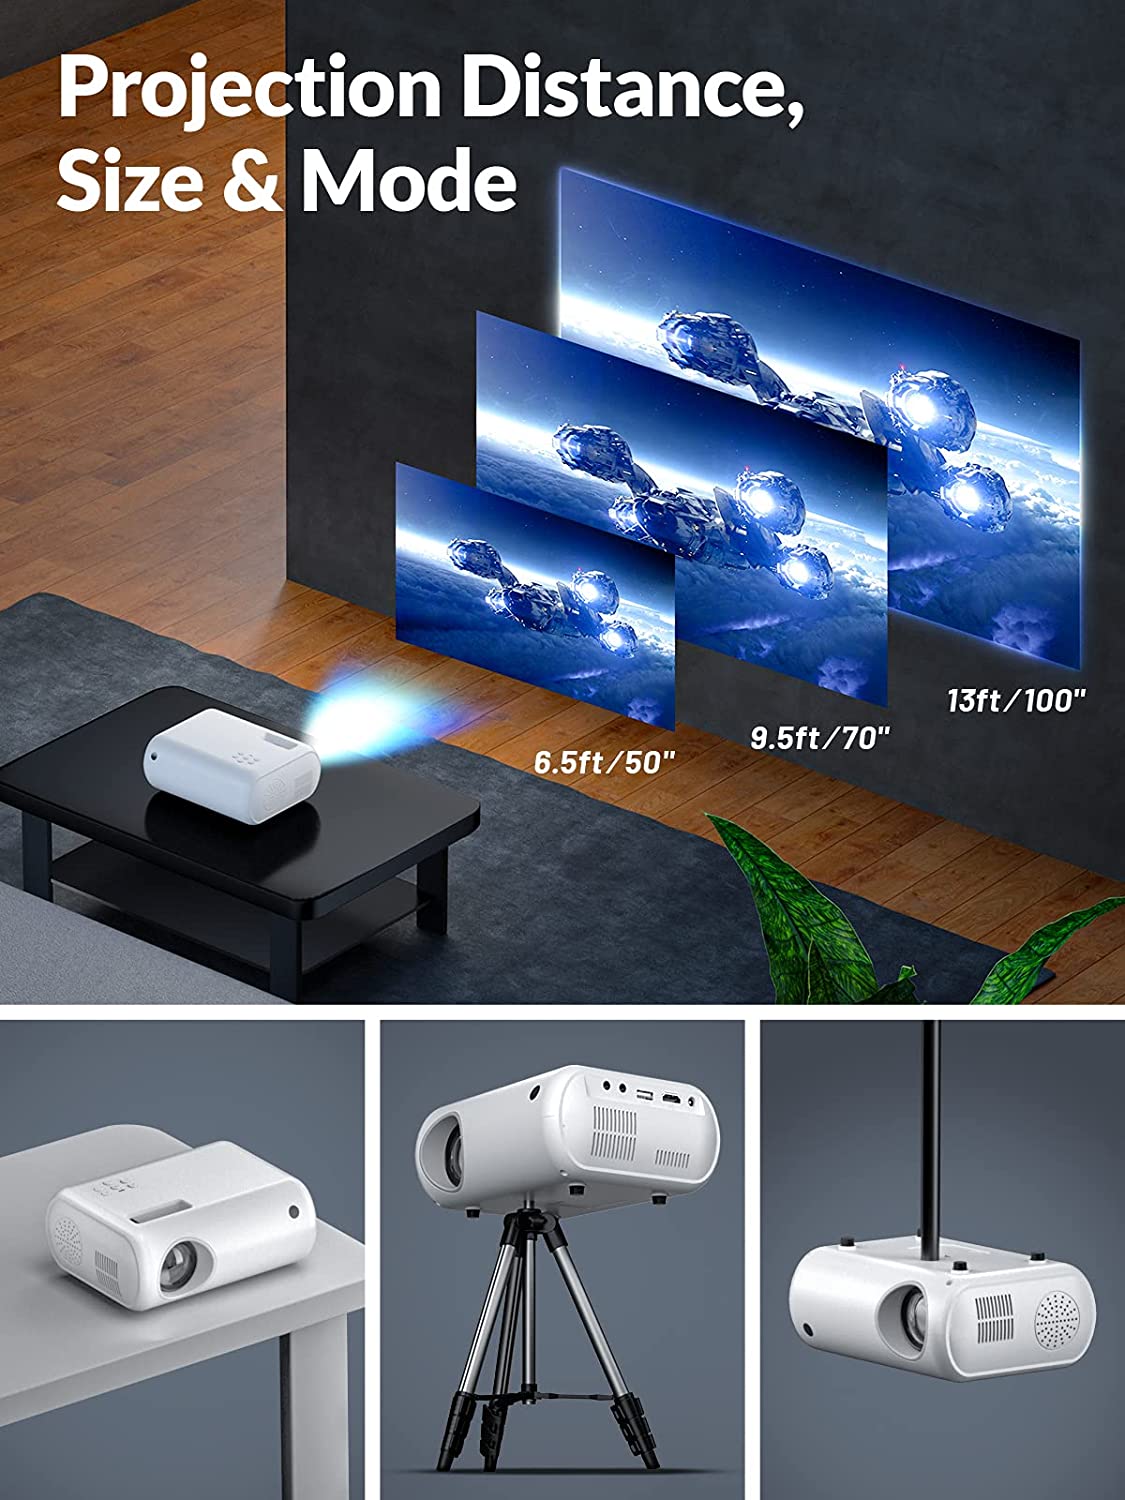 Yaber 1080P Projector with Wifi and Bluetooth, Portable Mini Home Theater  Projector with Bag, Gifts for Family, Friends, Kids 